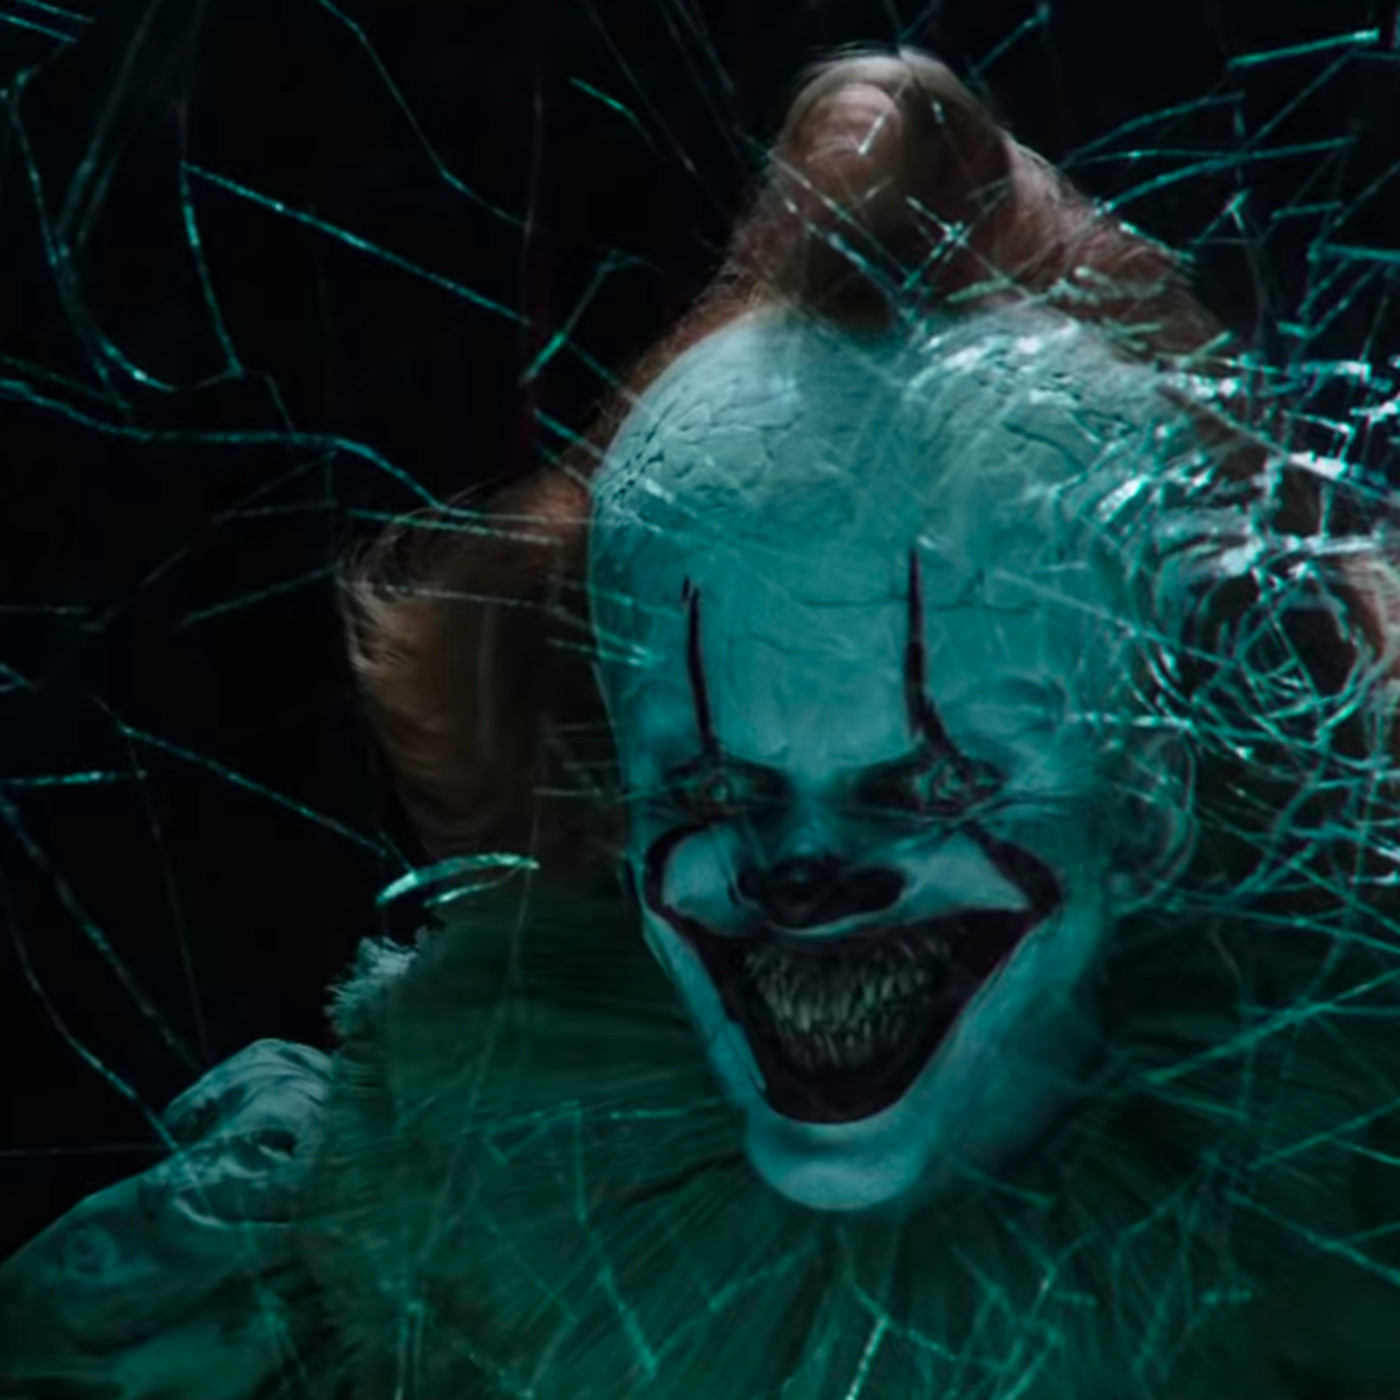 MACABRECast No. 17: IT Chapter 2 (2019)